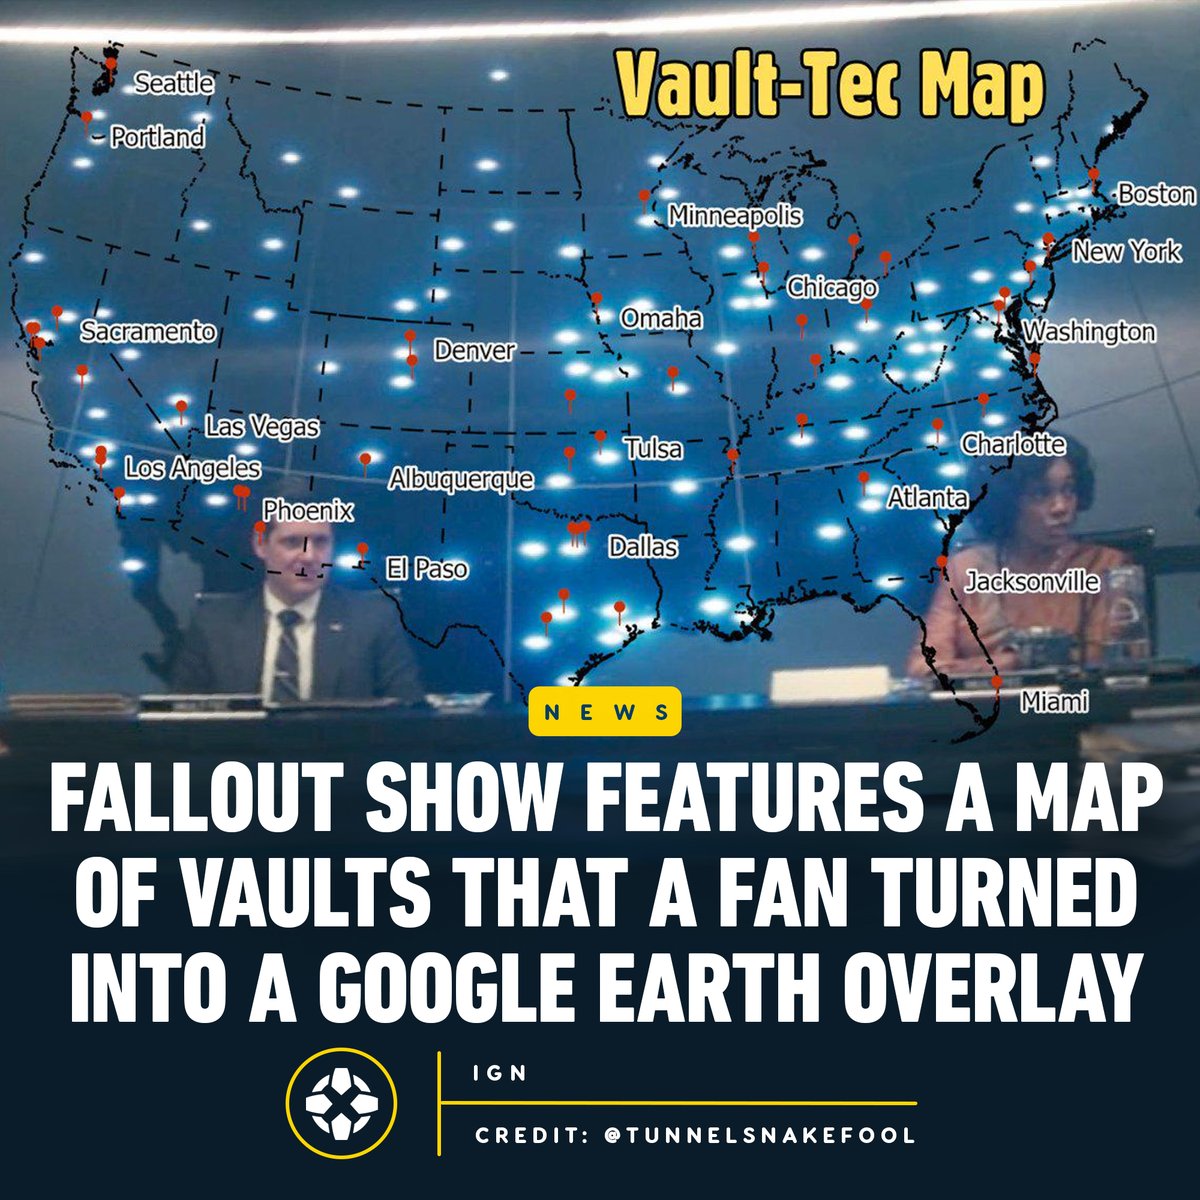 Find out if there's a Vault-Tec survival shelter near you thanks to a fan's interactive Google Earth overlay created using a map from the Fallout TV show. bit.ly/3W0rfOO